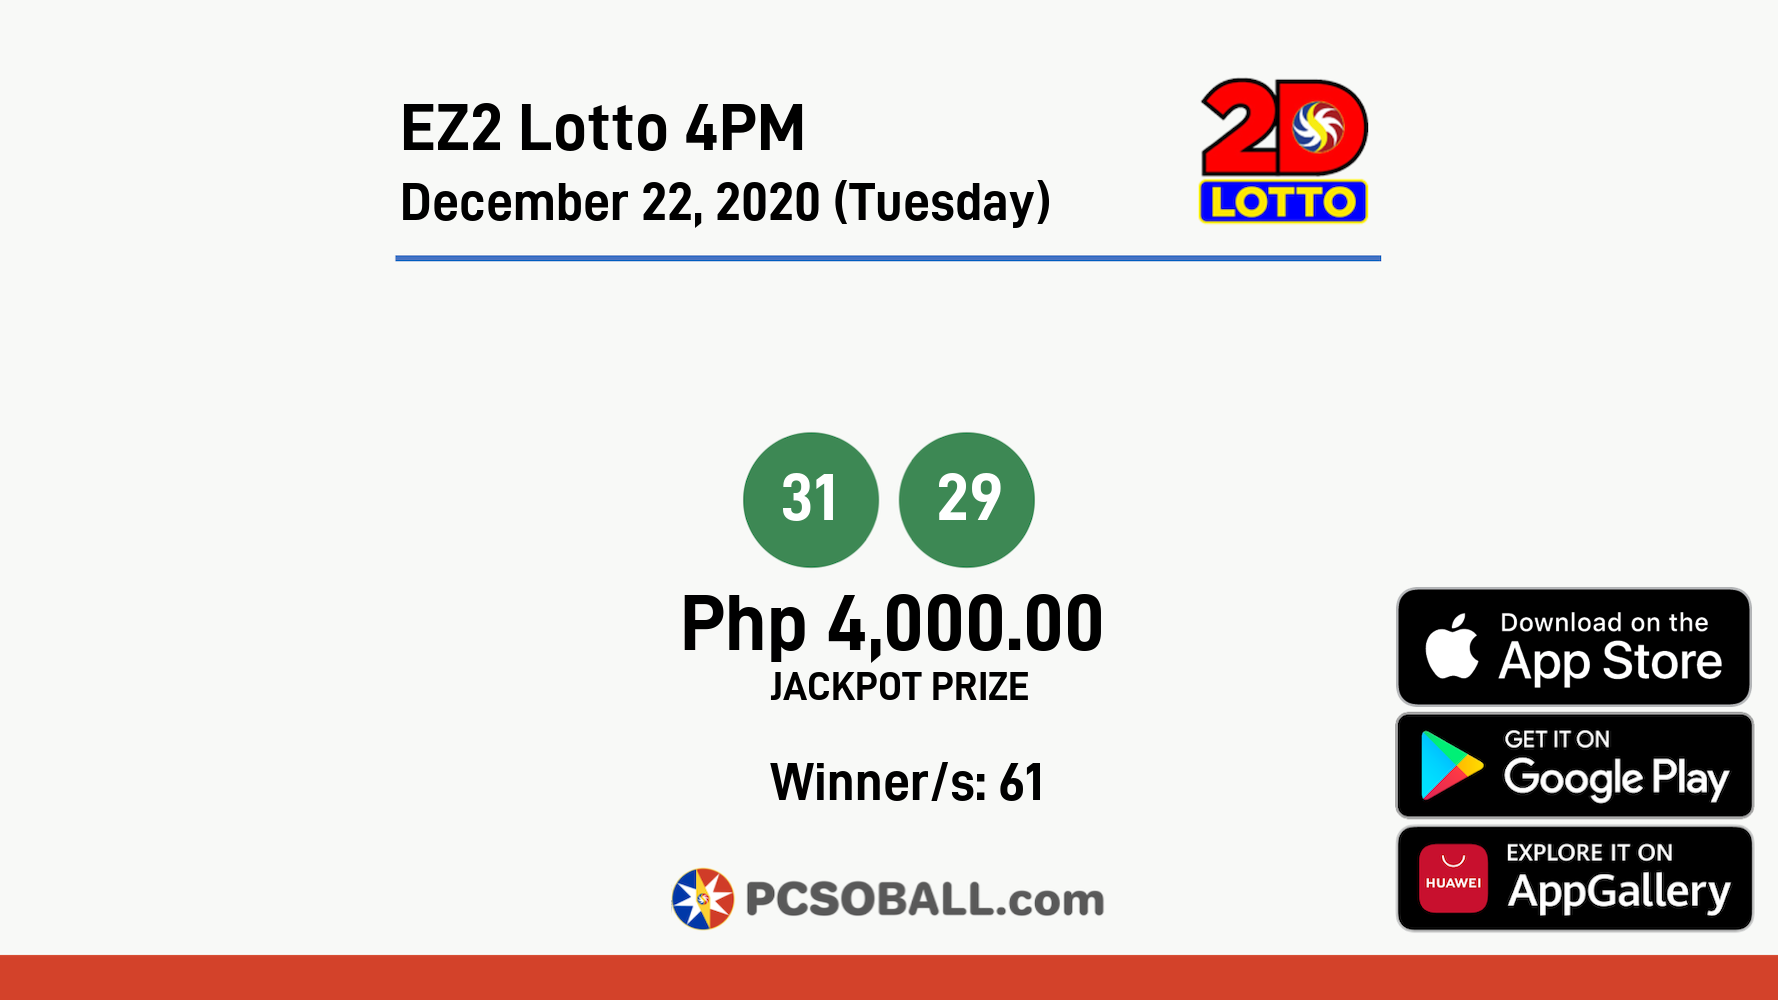 EZ2 Lotto 4PM December 22, 2020 (Tuesday) Result